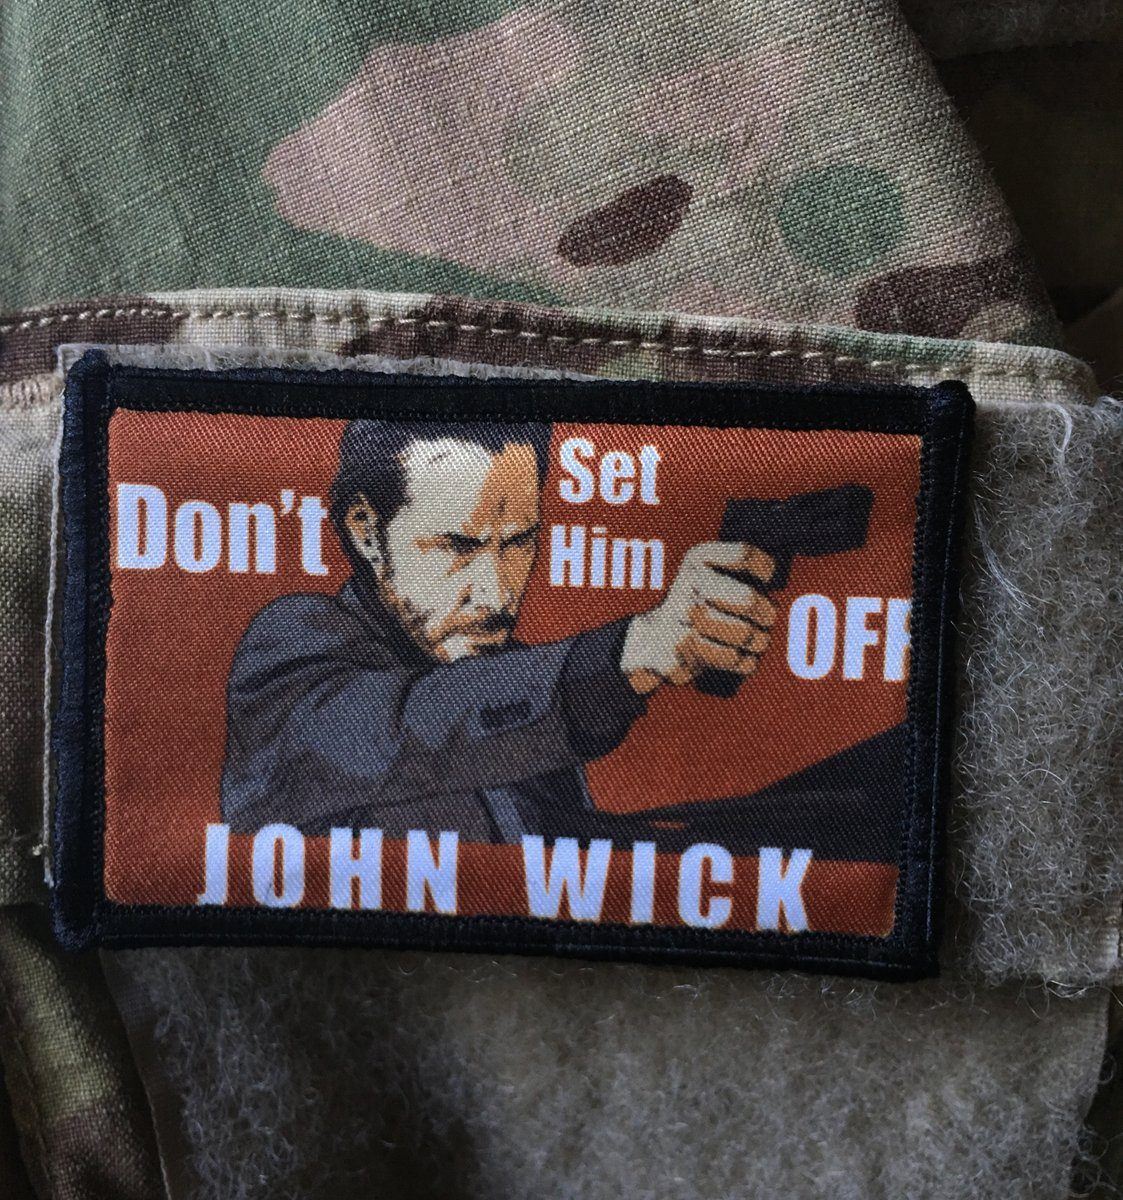 John Wick 'Don't Set Him Off' Morale Velcro Morale Patch Morale Patches Redheaded T Shirts 